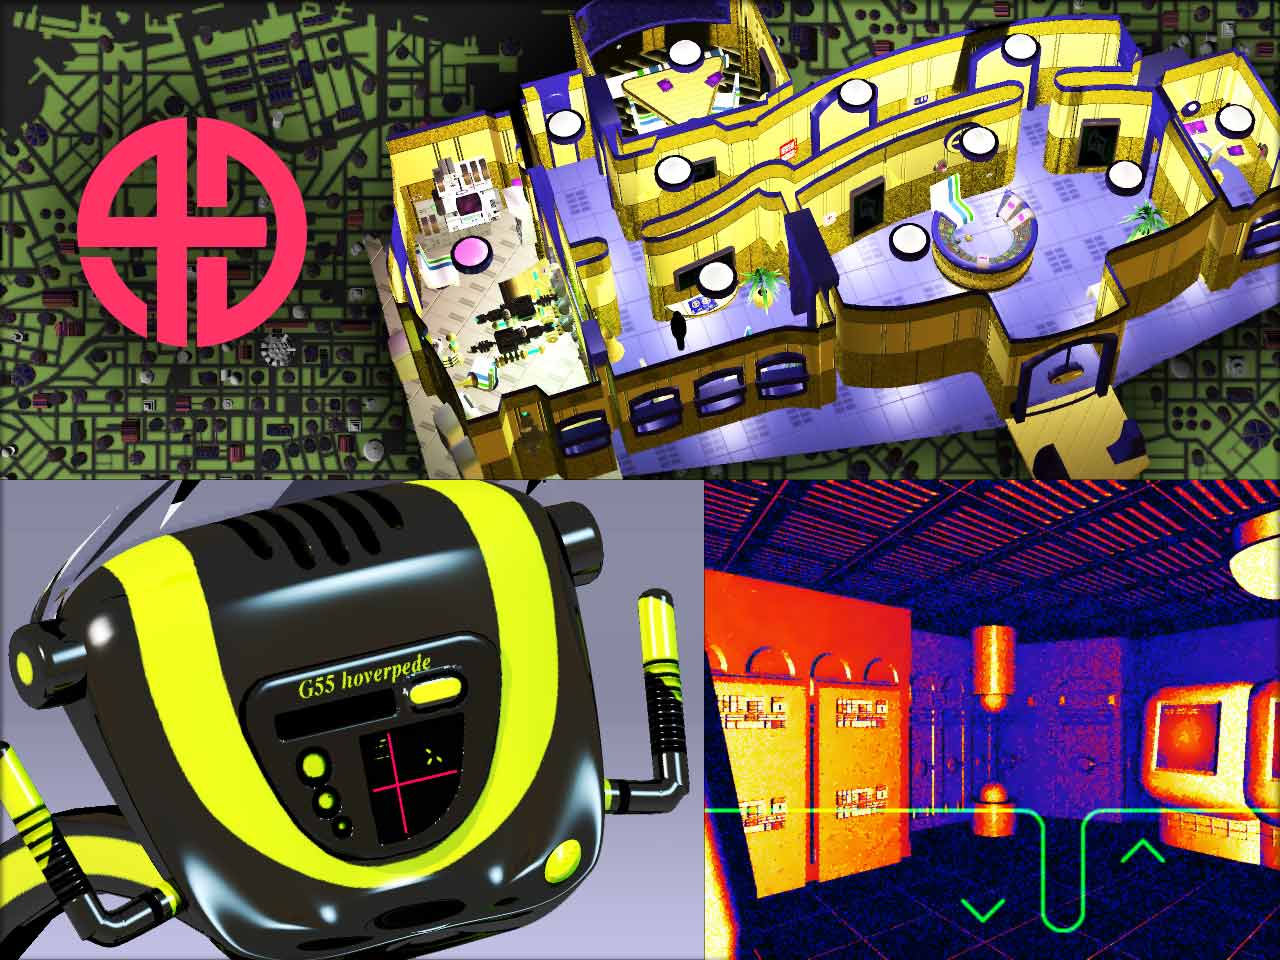 Collage of 4D game images: sci-fi enivironments and logo